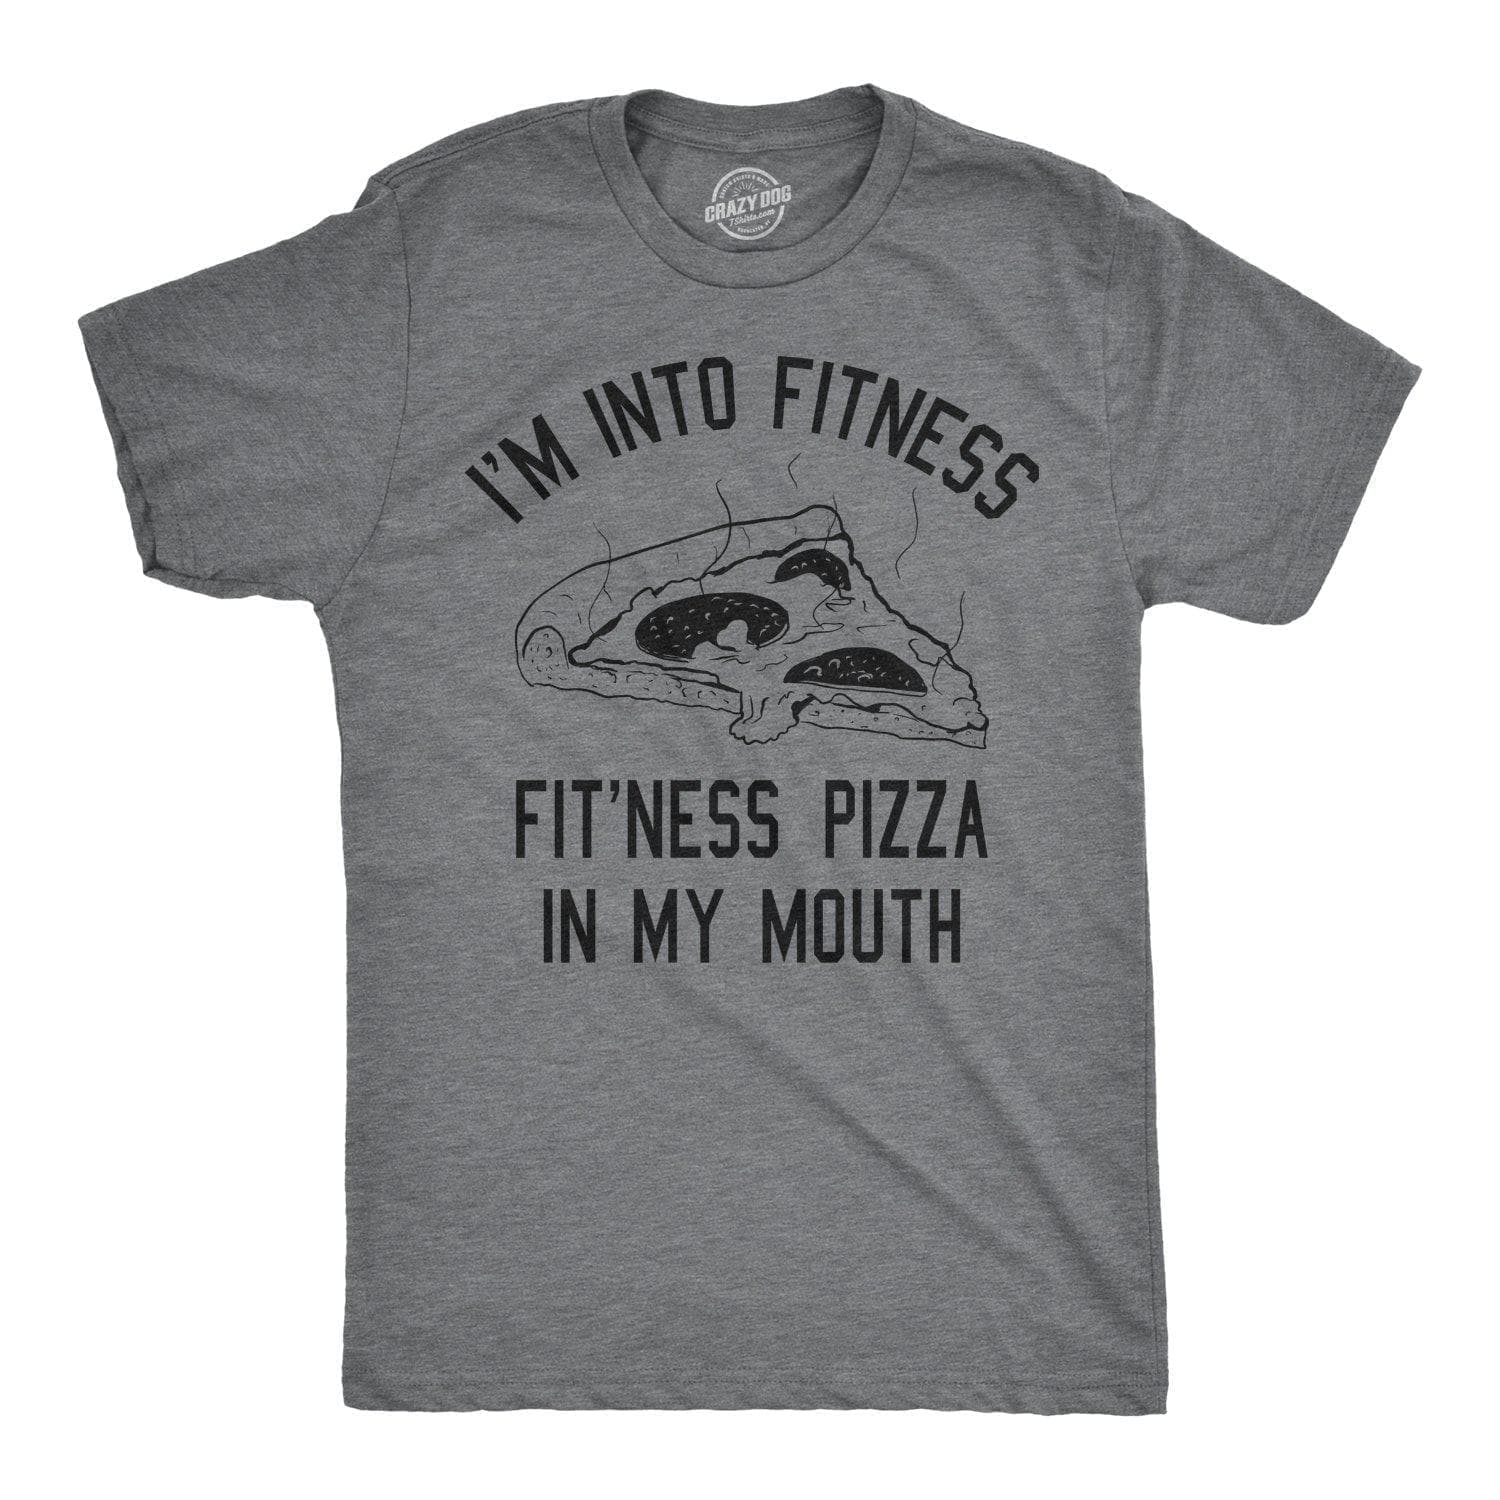 Fitness Pizza In My Mouth Men's Tshirt  -  Crazy Dog T-Shirts